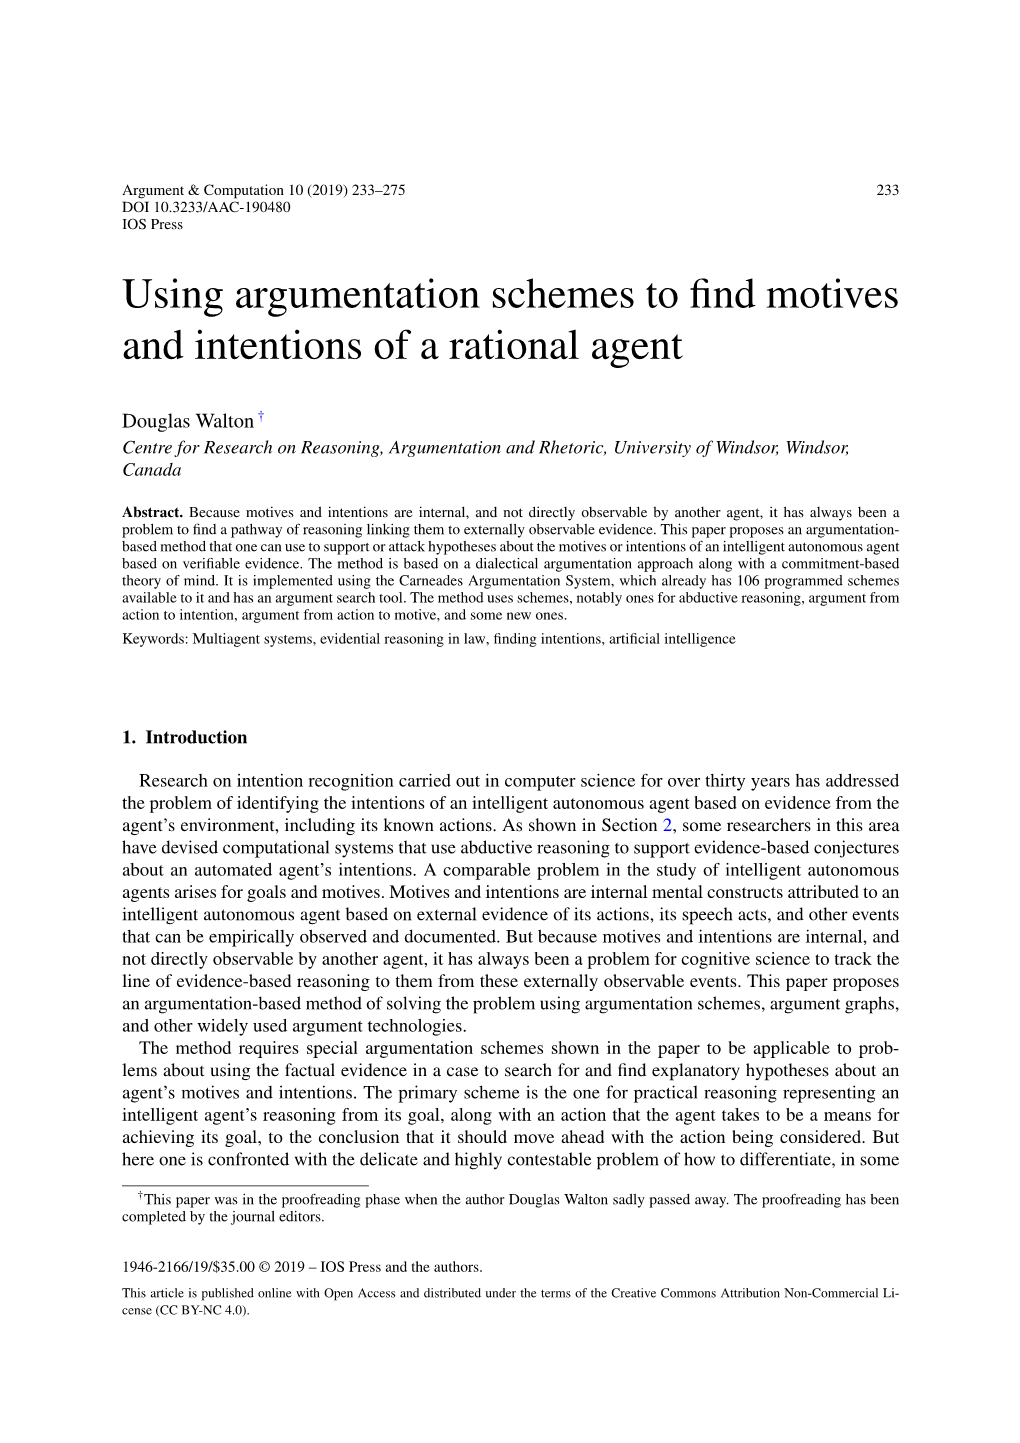 Using Argumentation Schemes to Find Motives and Intentions of a Rational